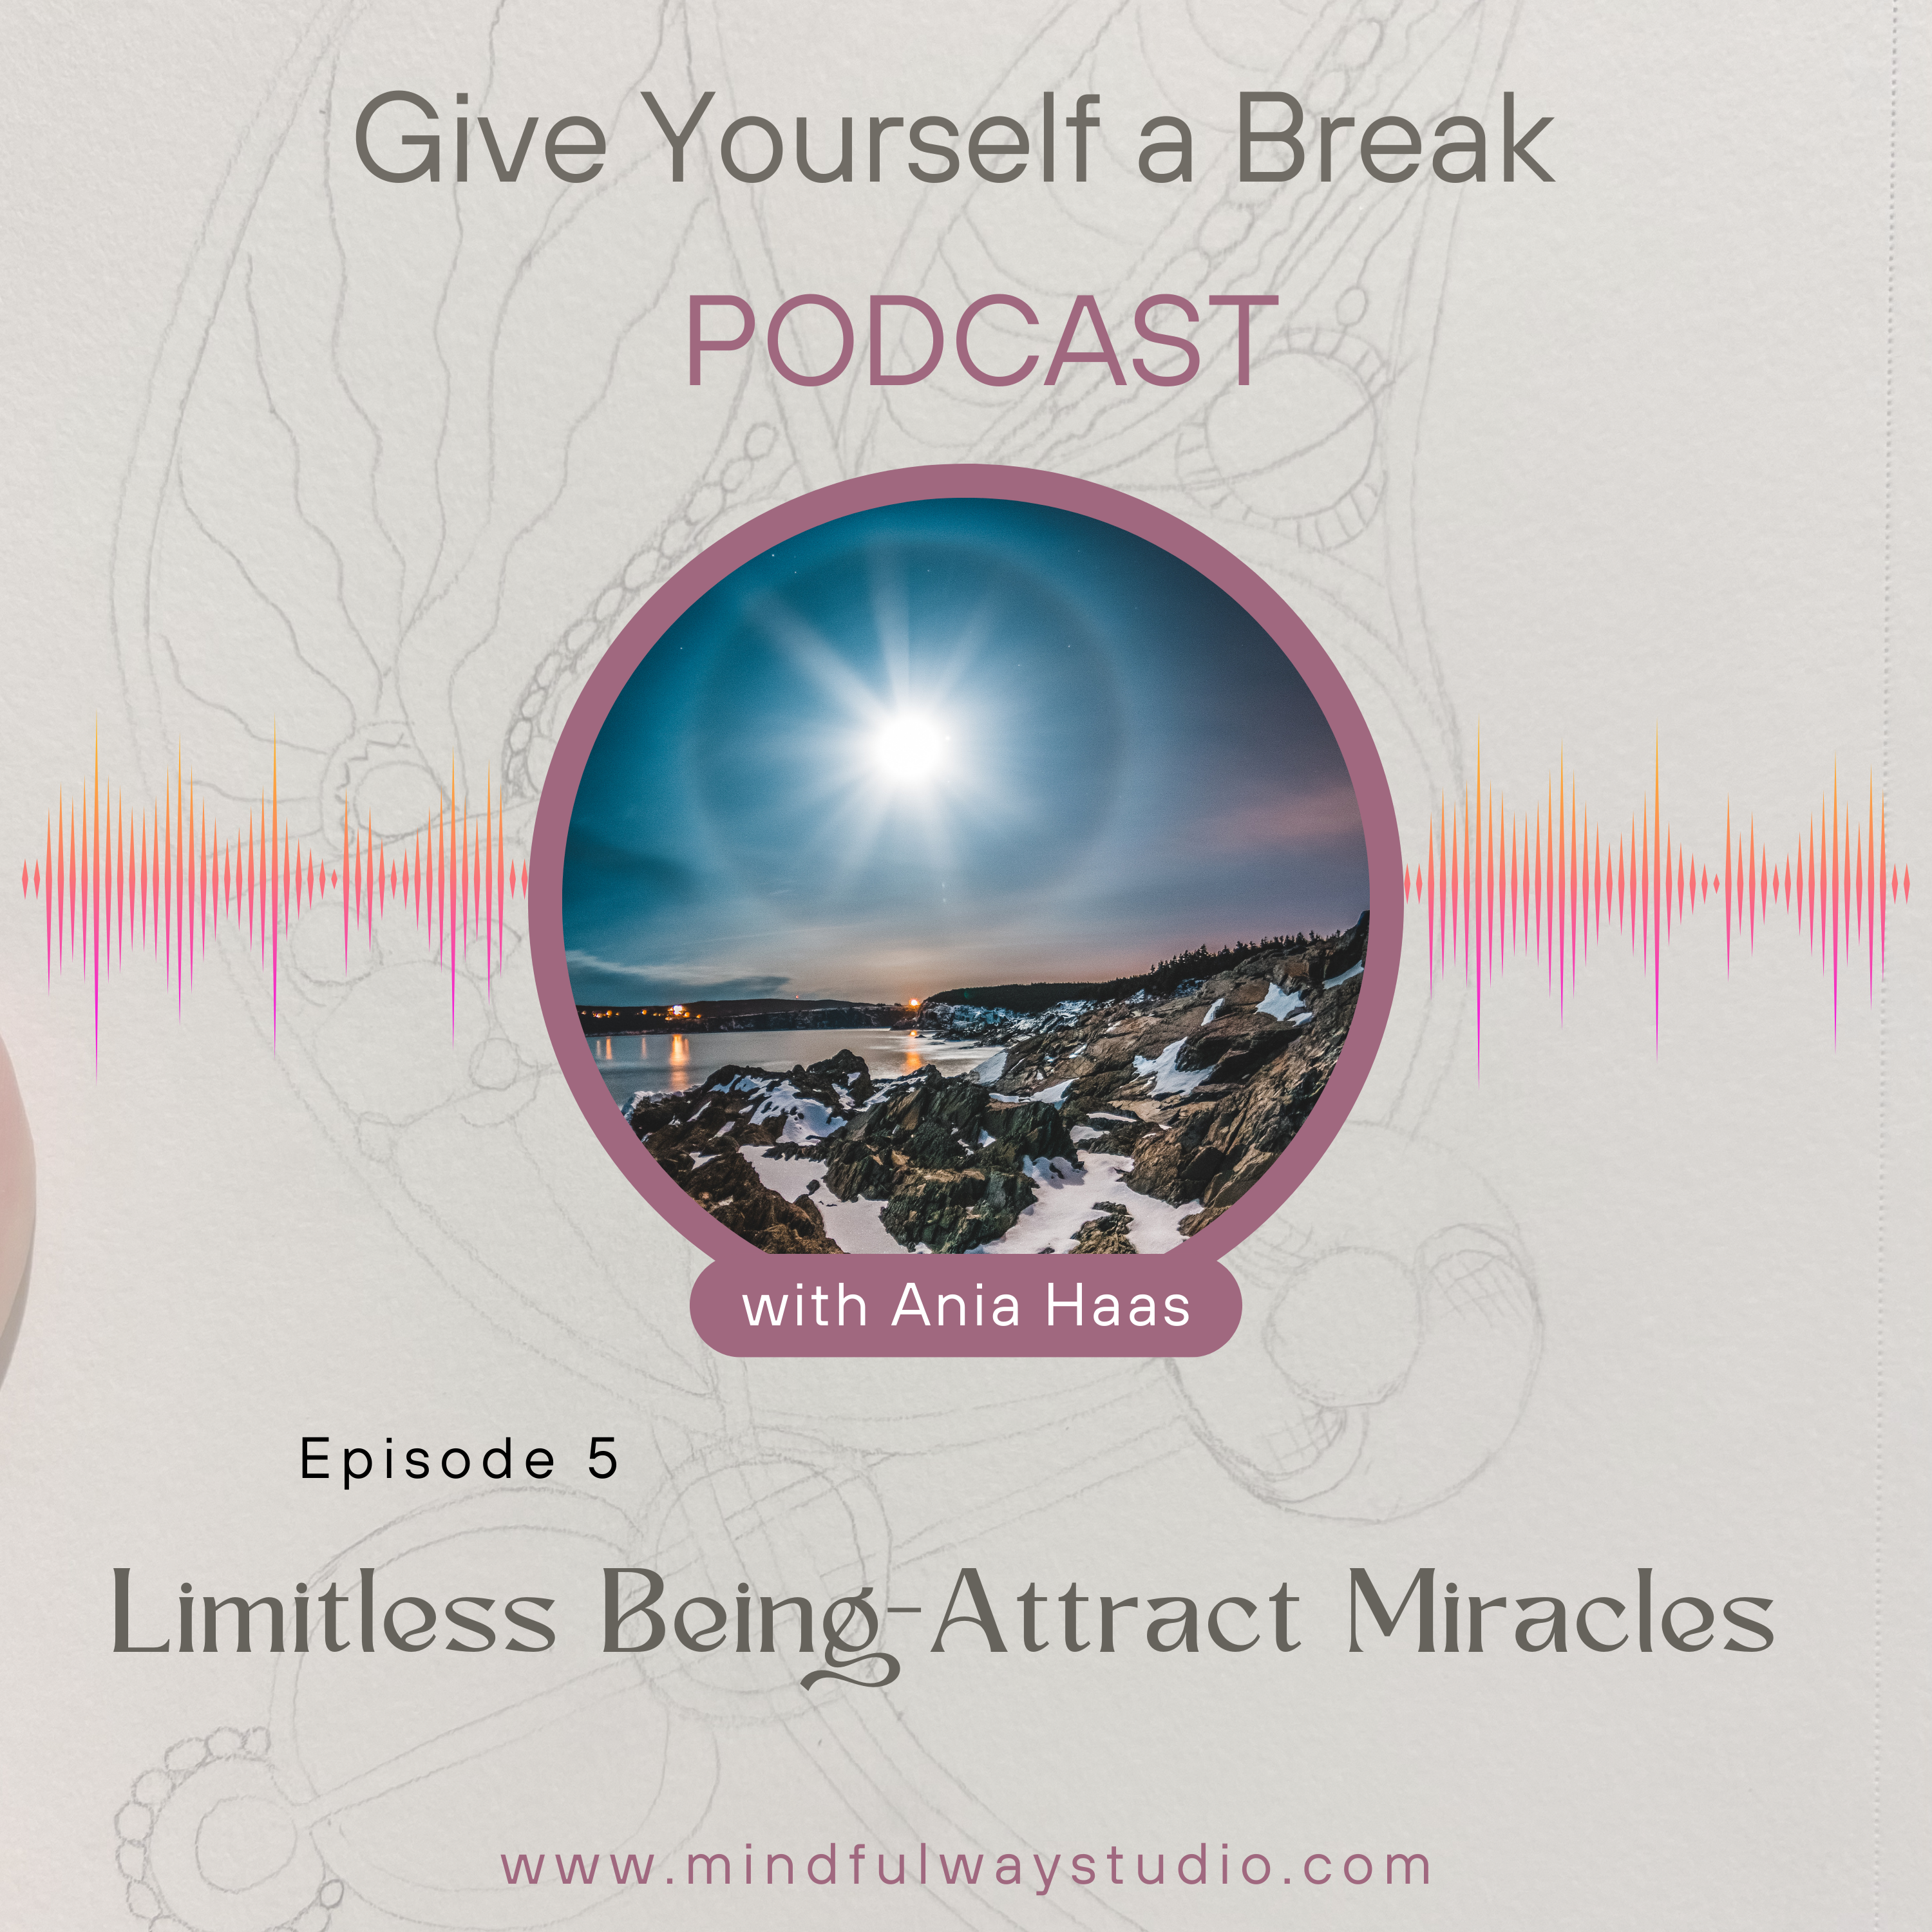 Limitless Being-Attract Miracles